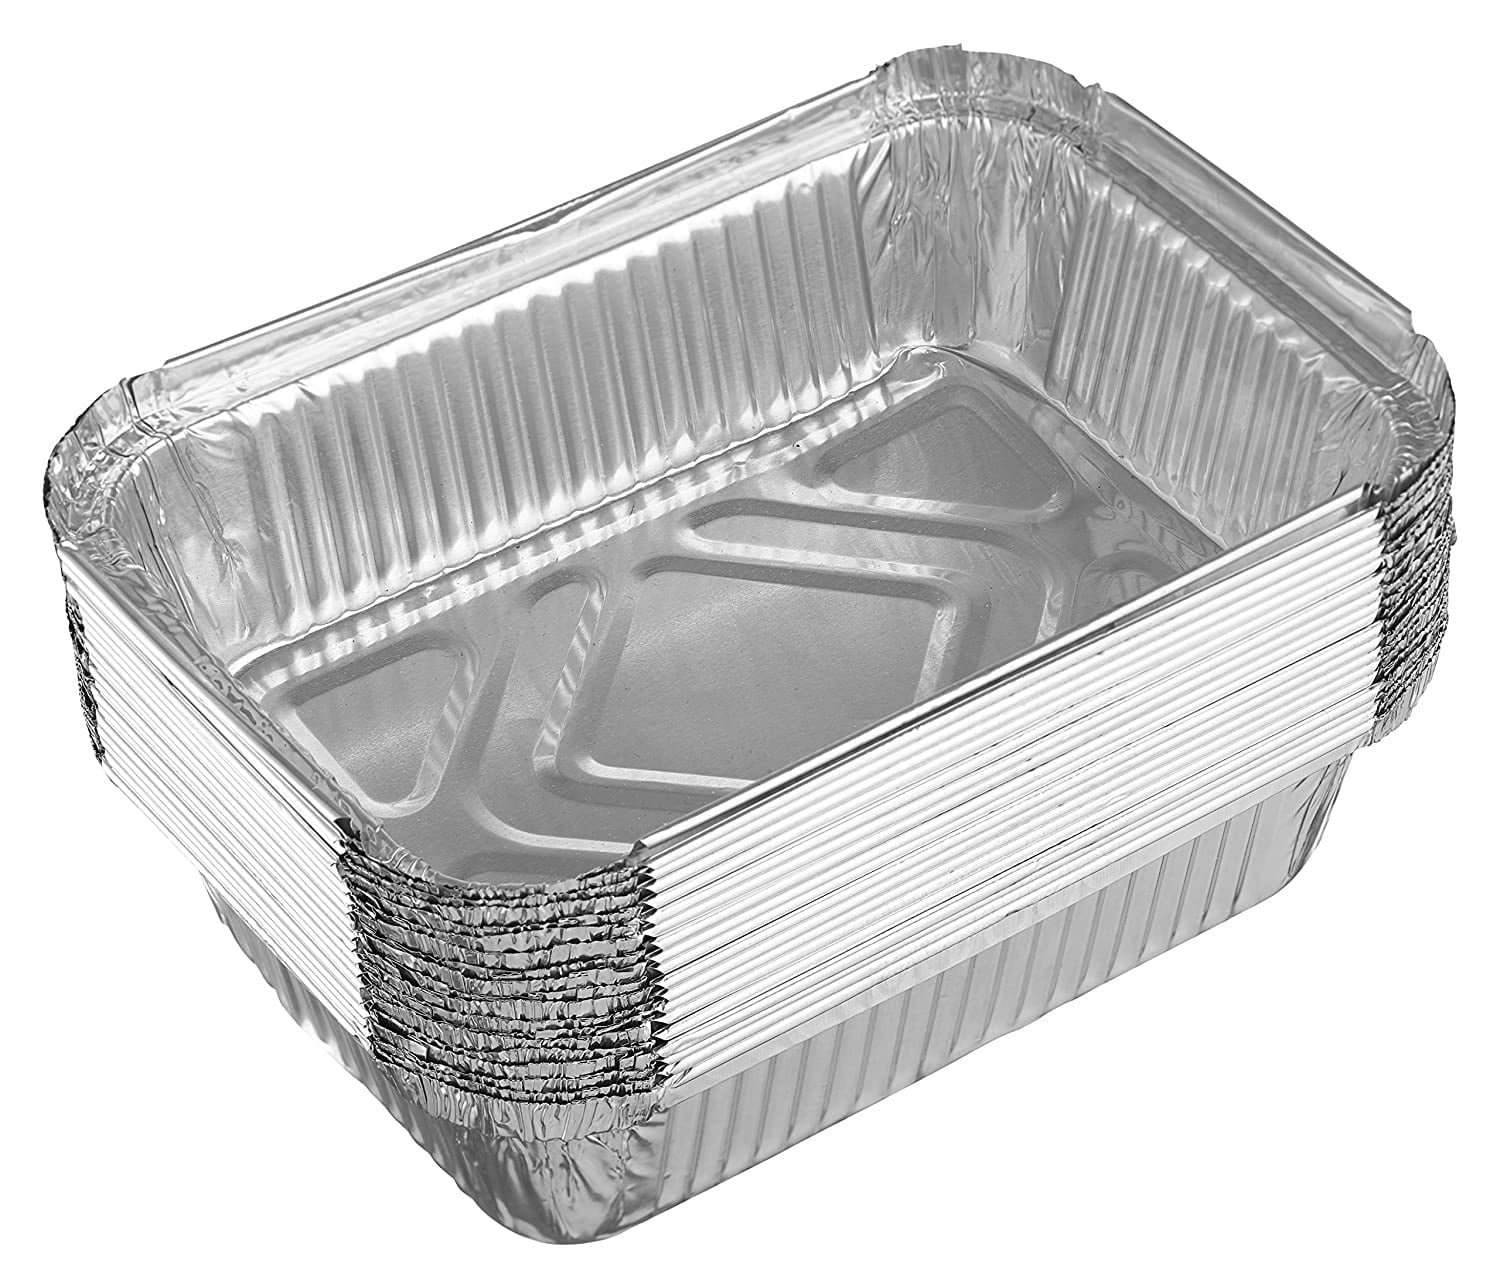 [50 Pack] 1.5 LB Oblong Take Out Foil Baking Pans Deep - 747 Aluminum Pan  for Baking, Roasting, Potluck, Reheating, Catering, Party, BBQ, Baking by